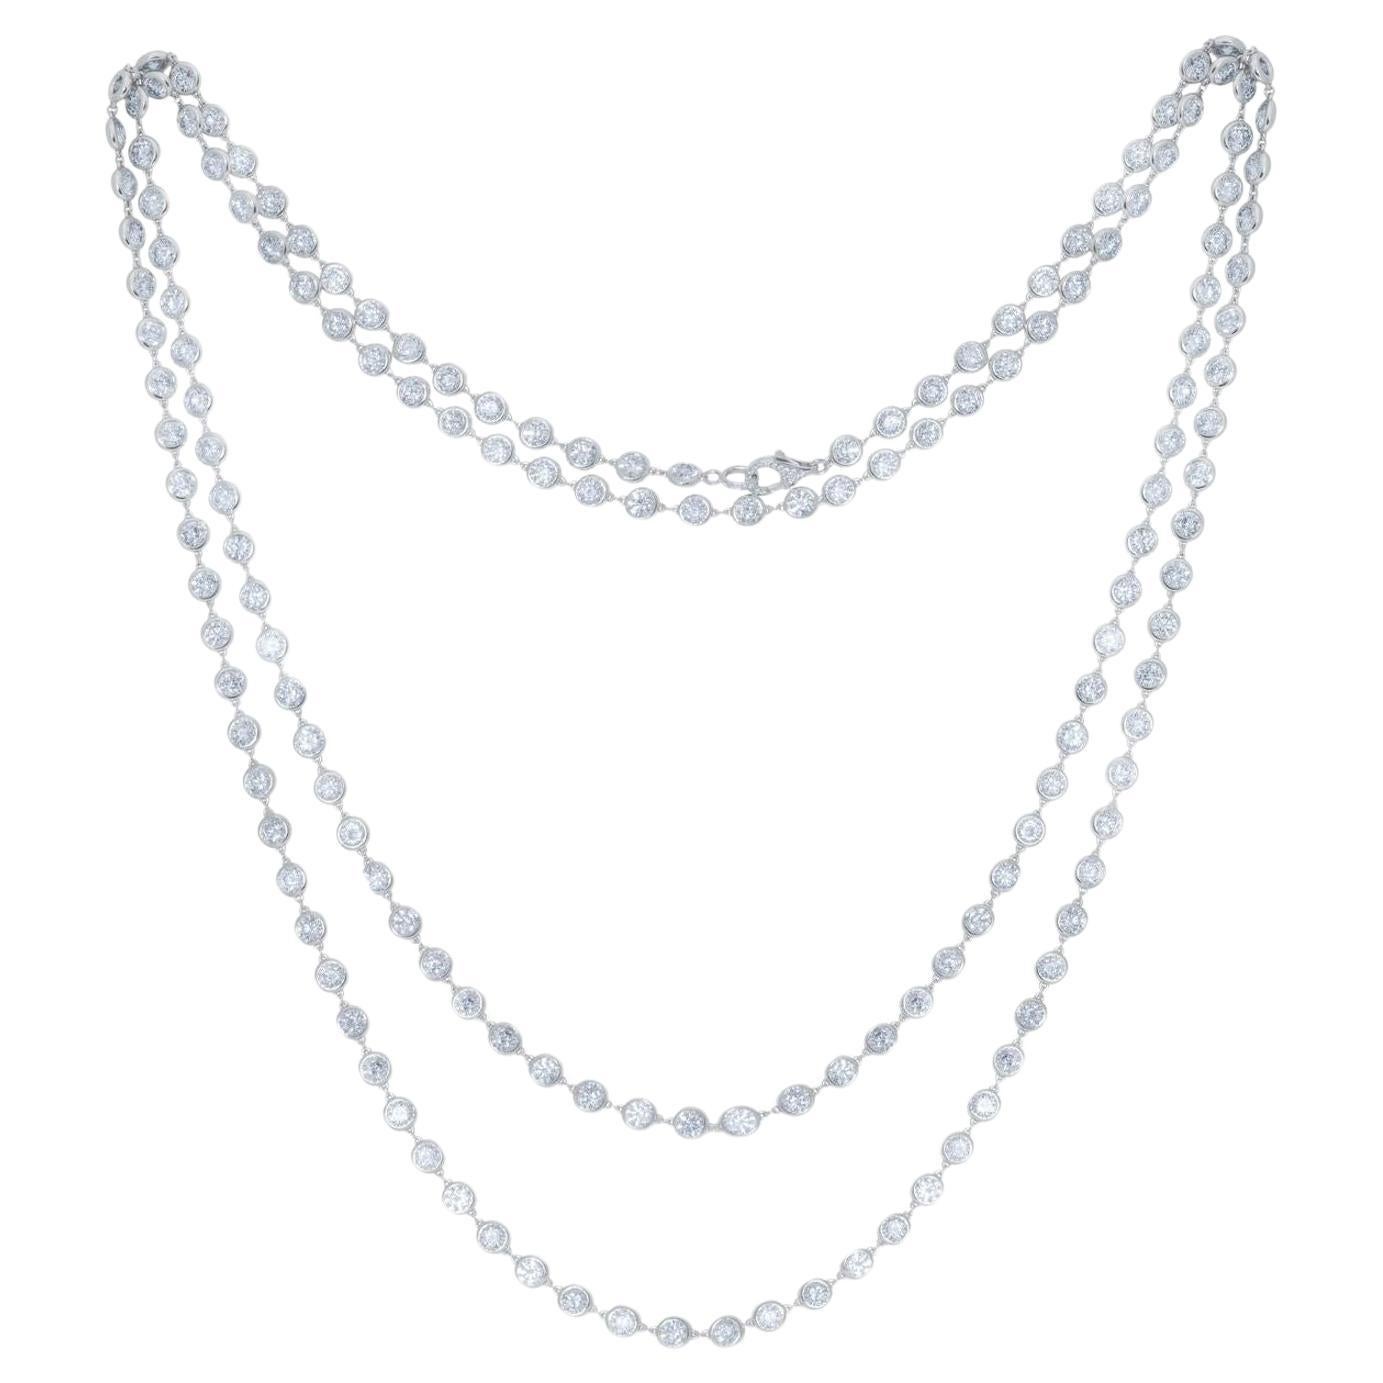 Diana M.Custom 40.00 Cts Diamond-By-The-Yard Necklace 42" 18K White Gold 